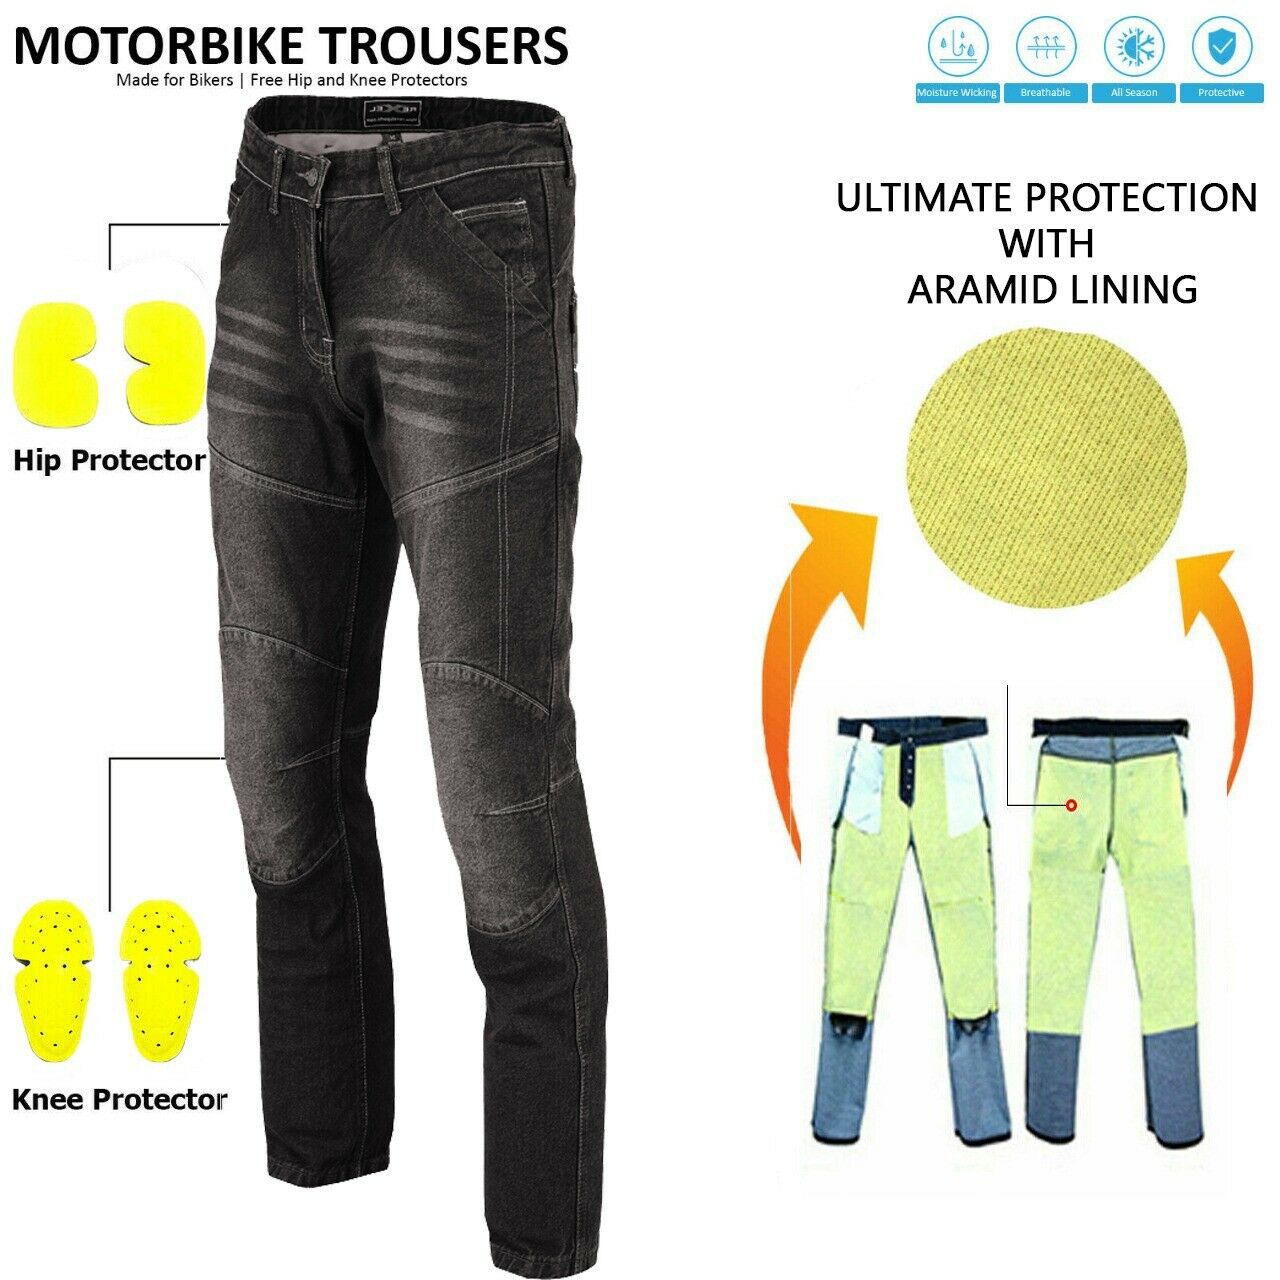 How to buy a pair of protective motorcycle jeans